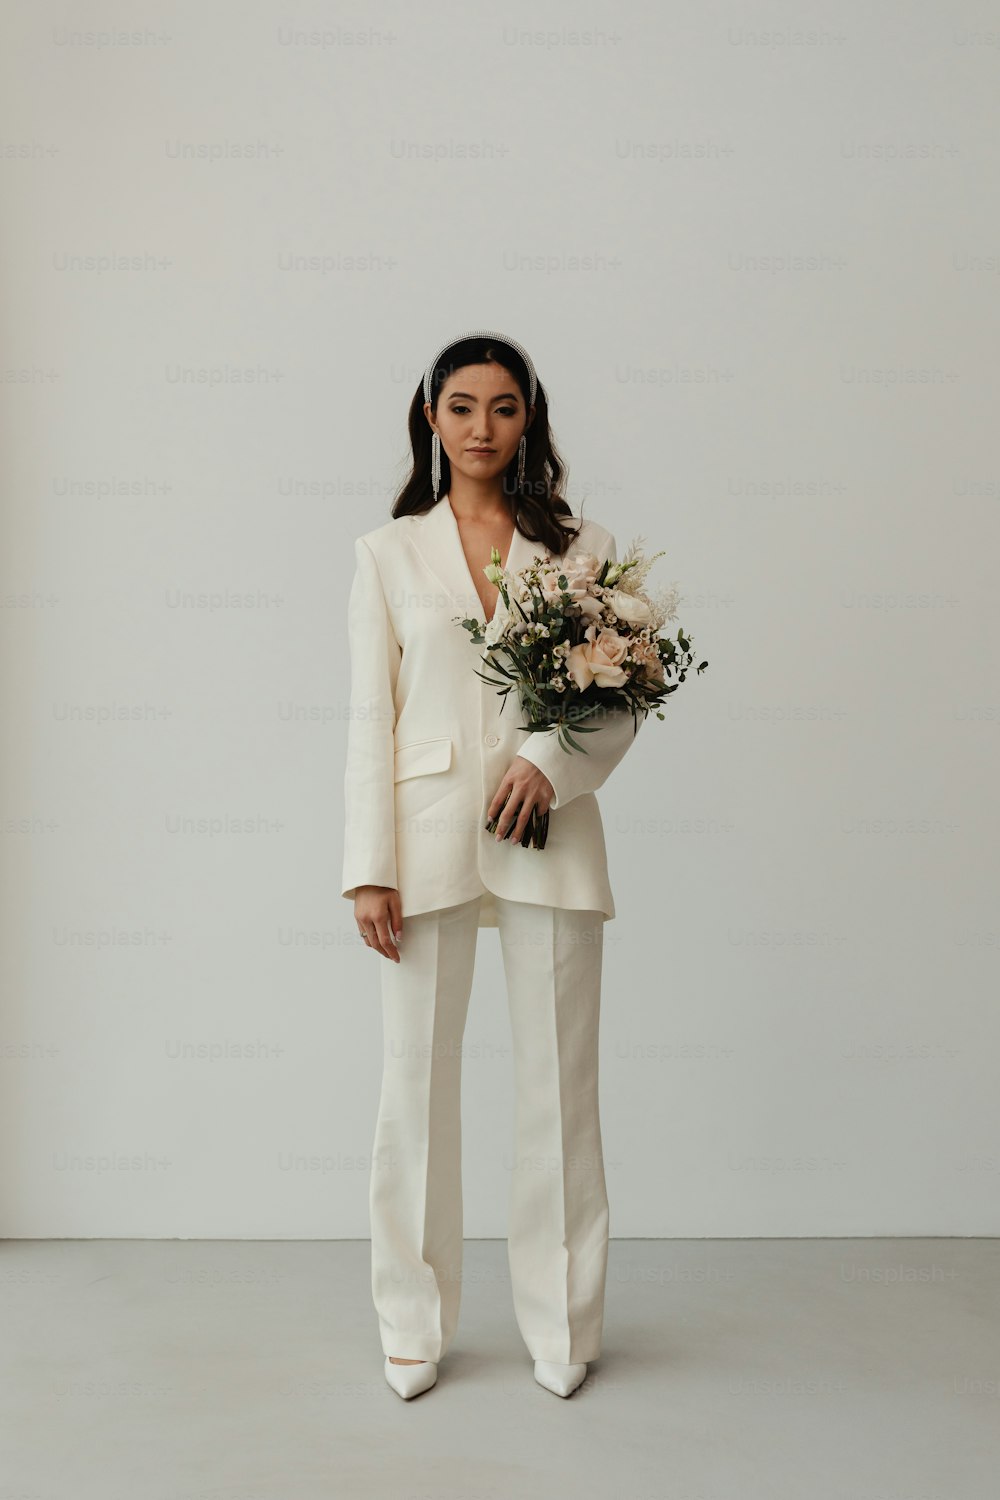 a woman in a white suit holding a bouquet of flowers